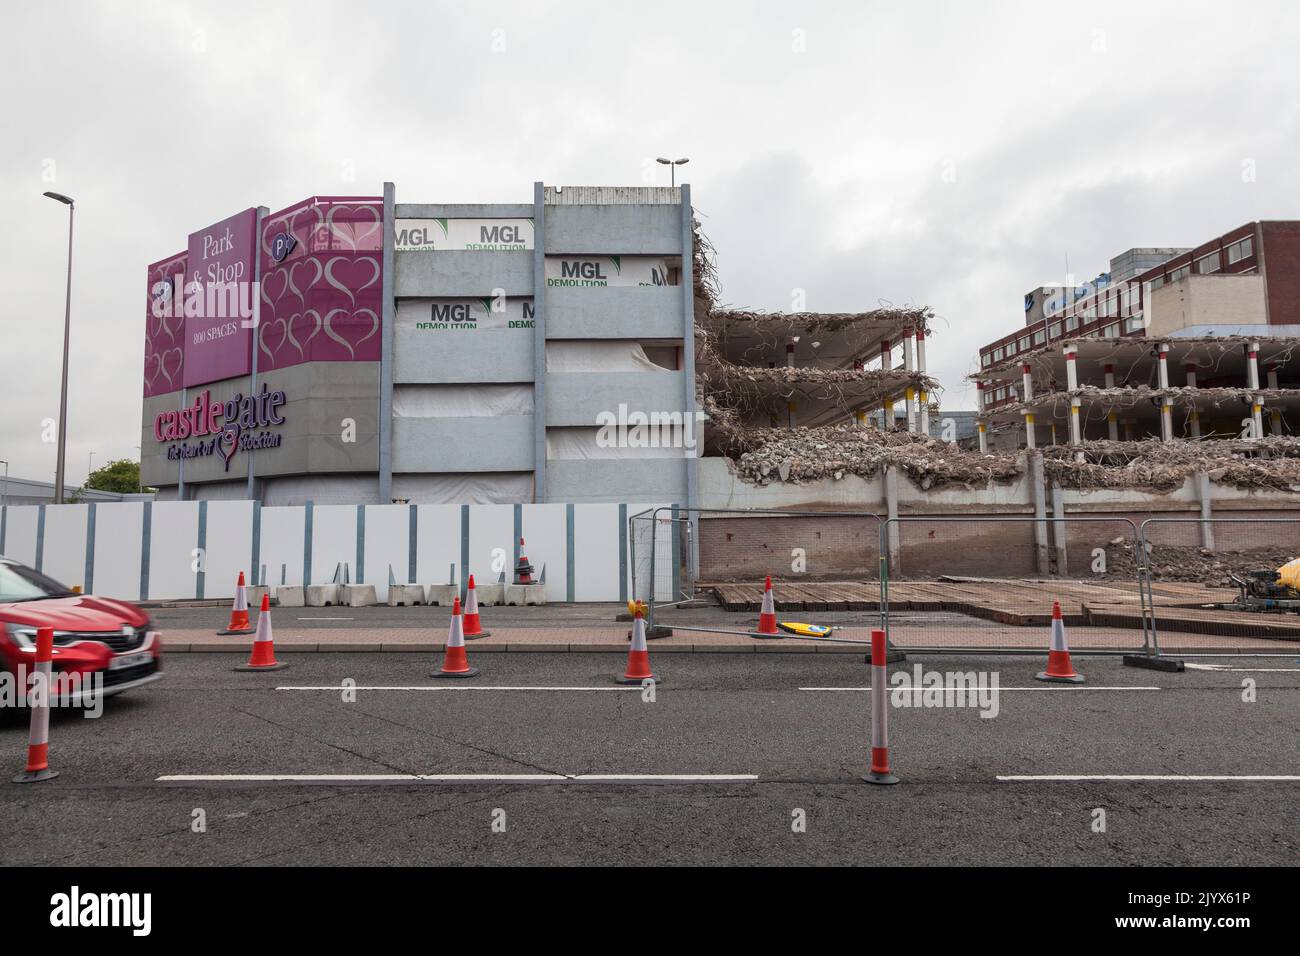 Stockton on Tees, UK. 8th September 2022. Demolition work has started on the Castlegate Centre as part of the Councils plans to open up the High Street to the riverside. David Dixon /Alamy Stock Photo